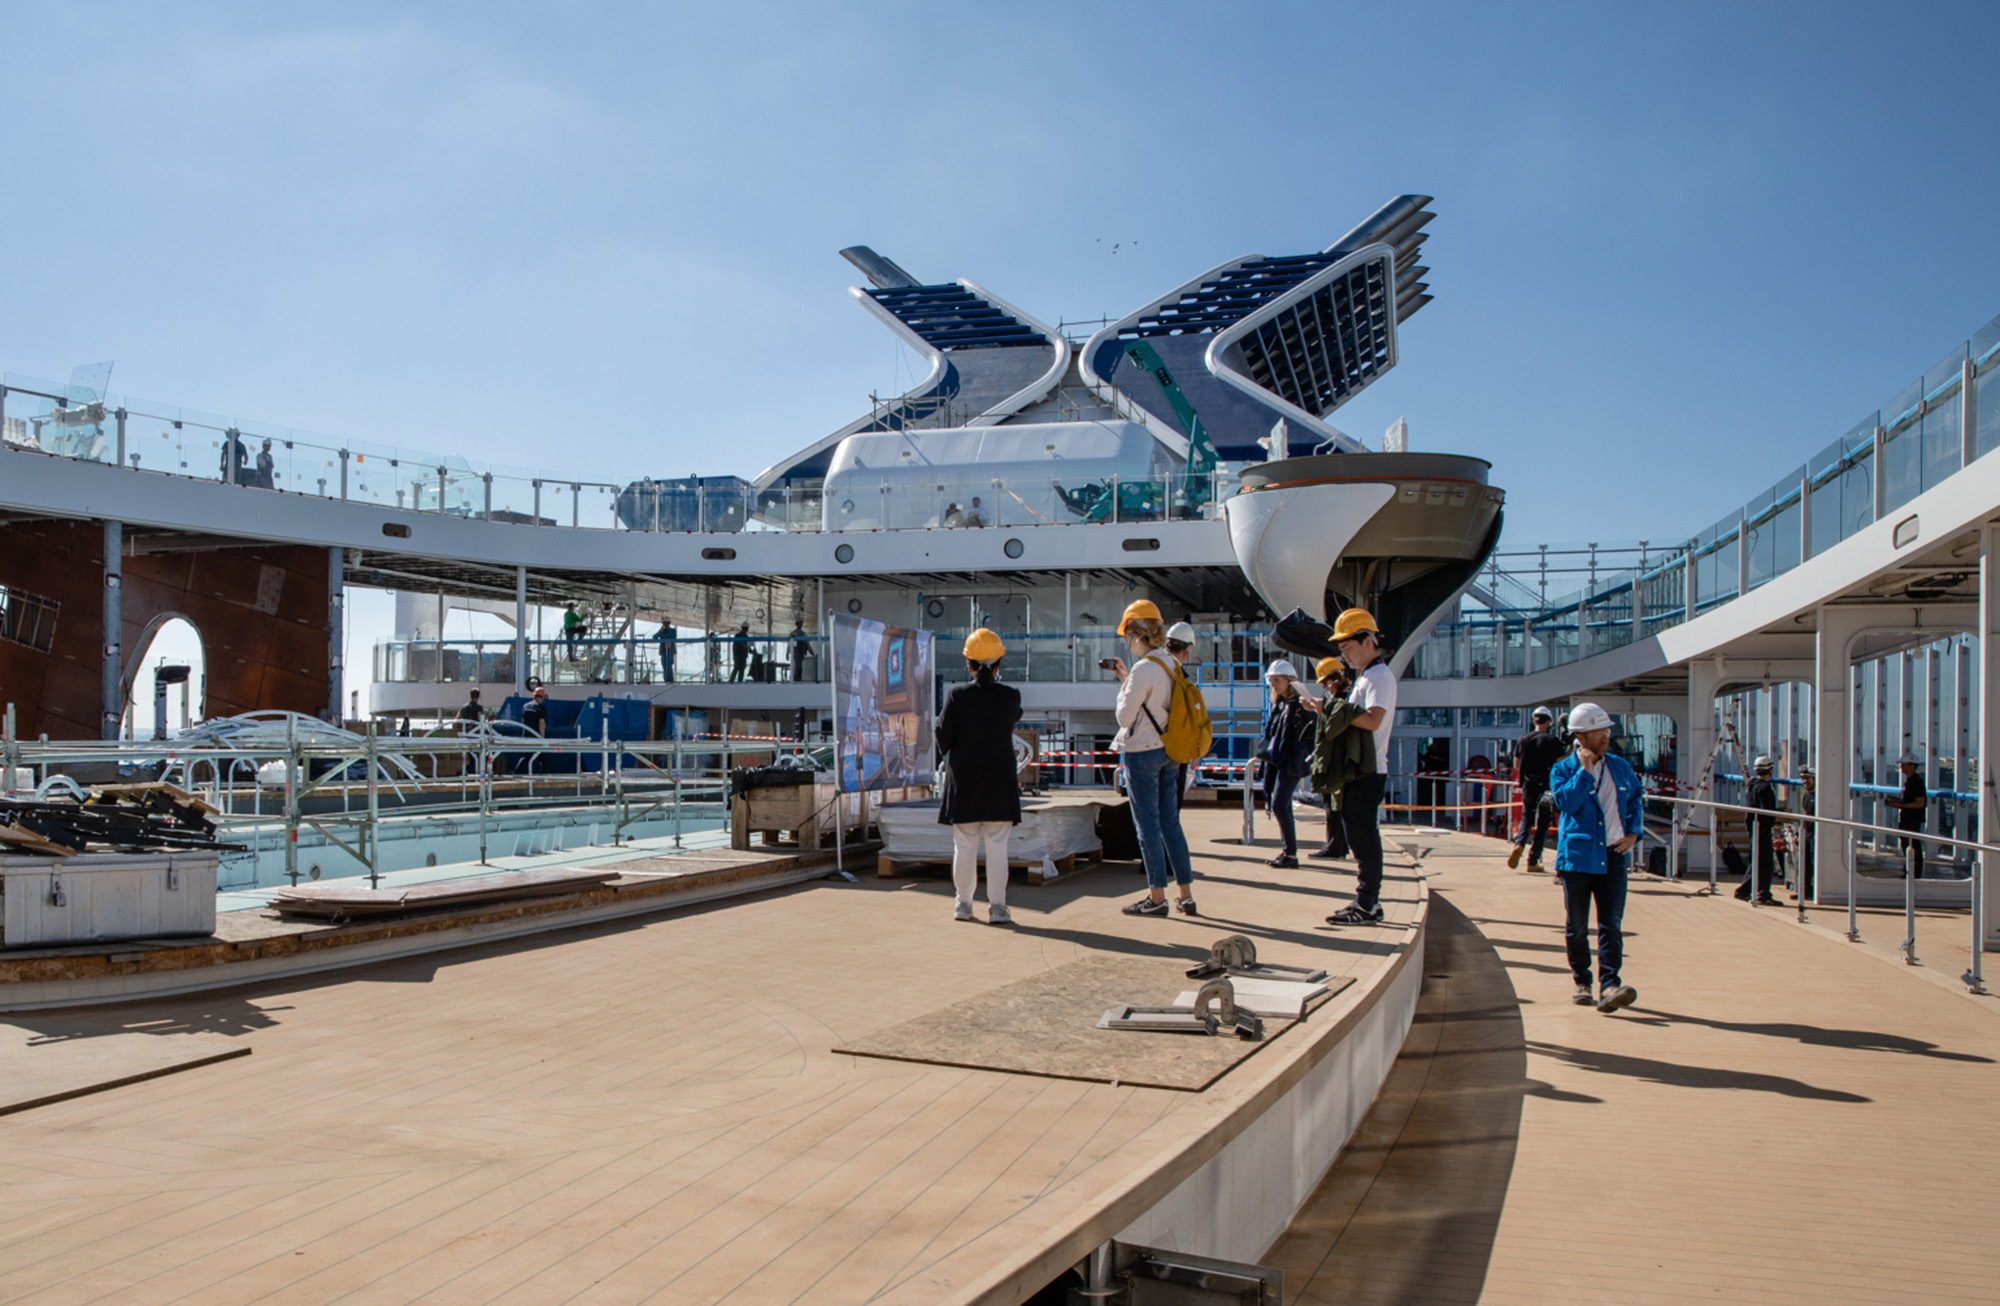 Visitors inspect the Resort deck area as construction work continues aboard the Celebrity Edge cruise ship, operated by Royal Caribbean Cruises.